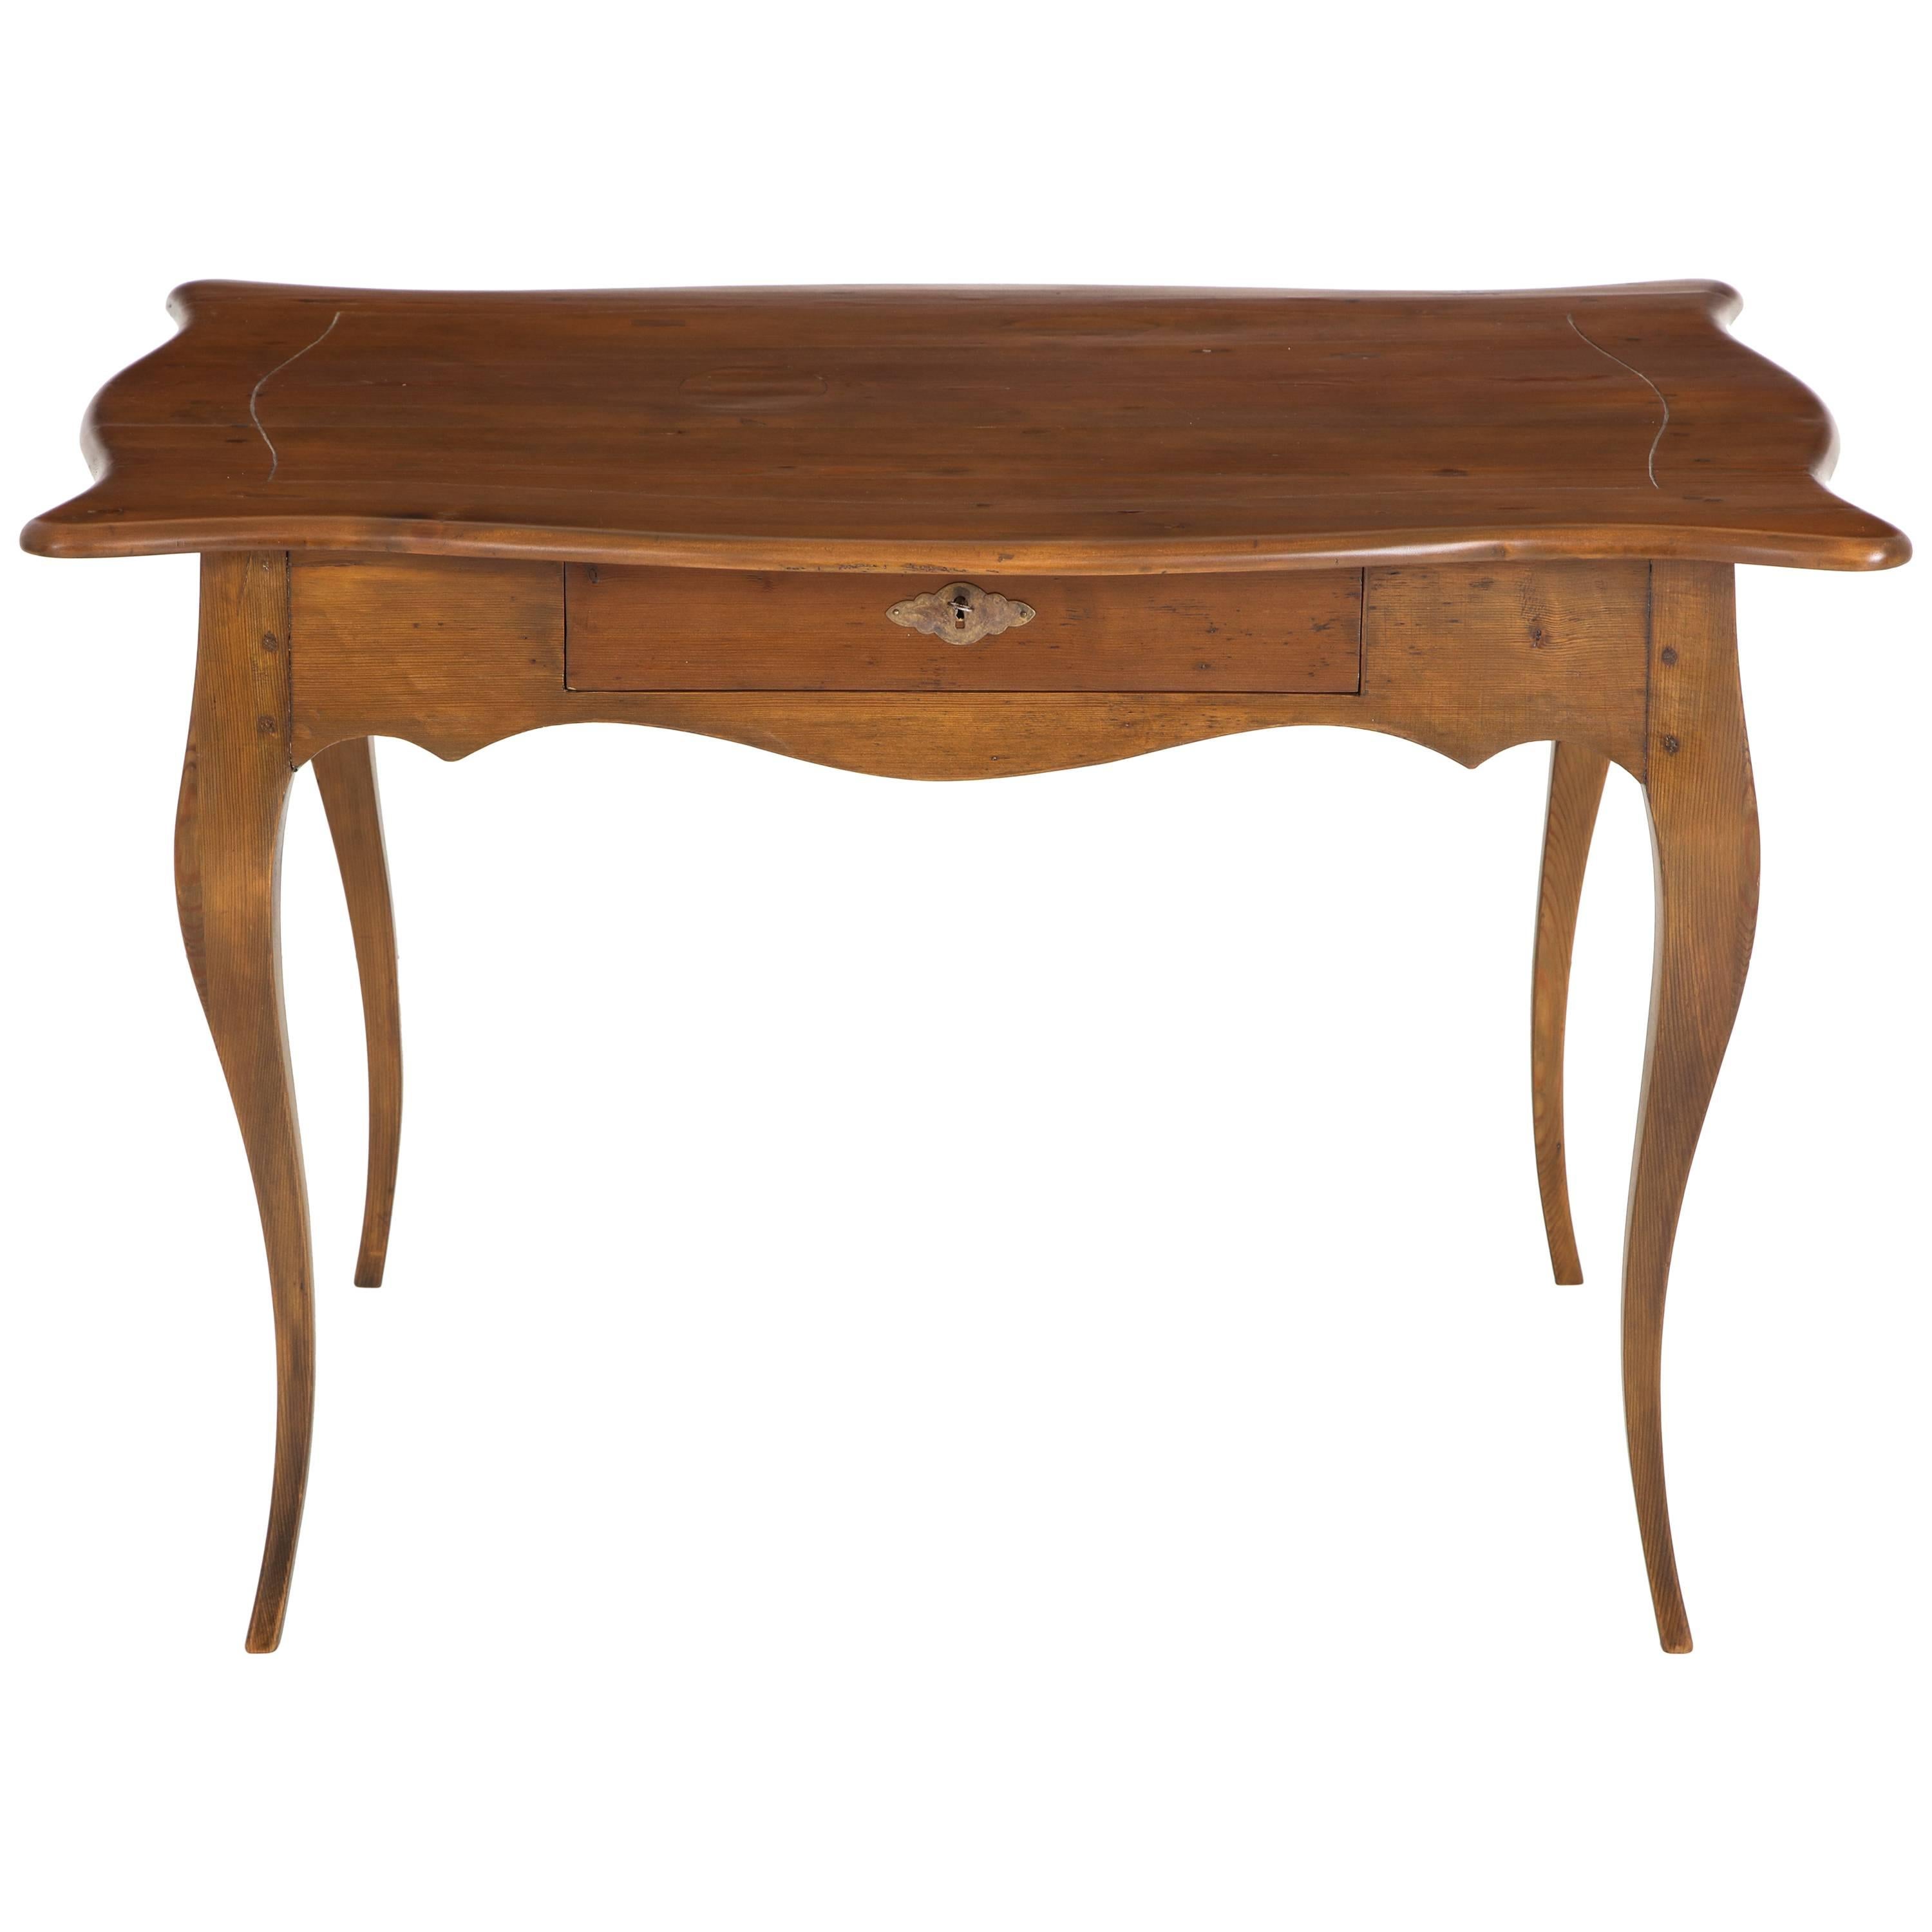 Rococo Pine Table or Desk with Single Drawer, Scalloped Apron and Cabriole Legs